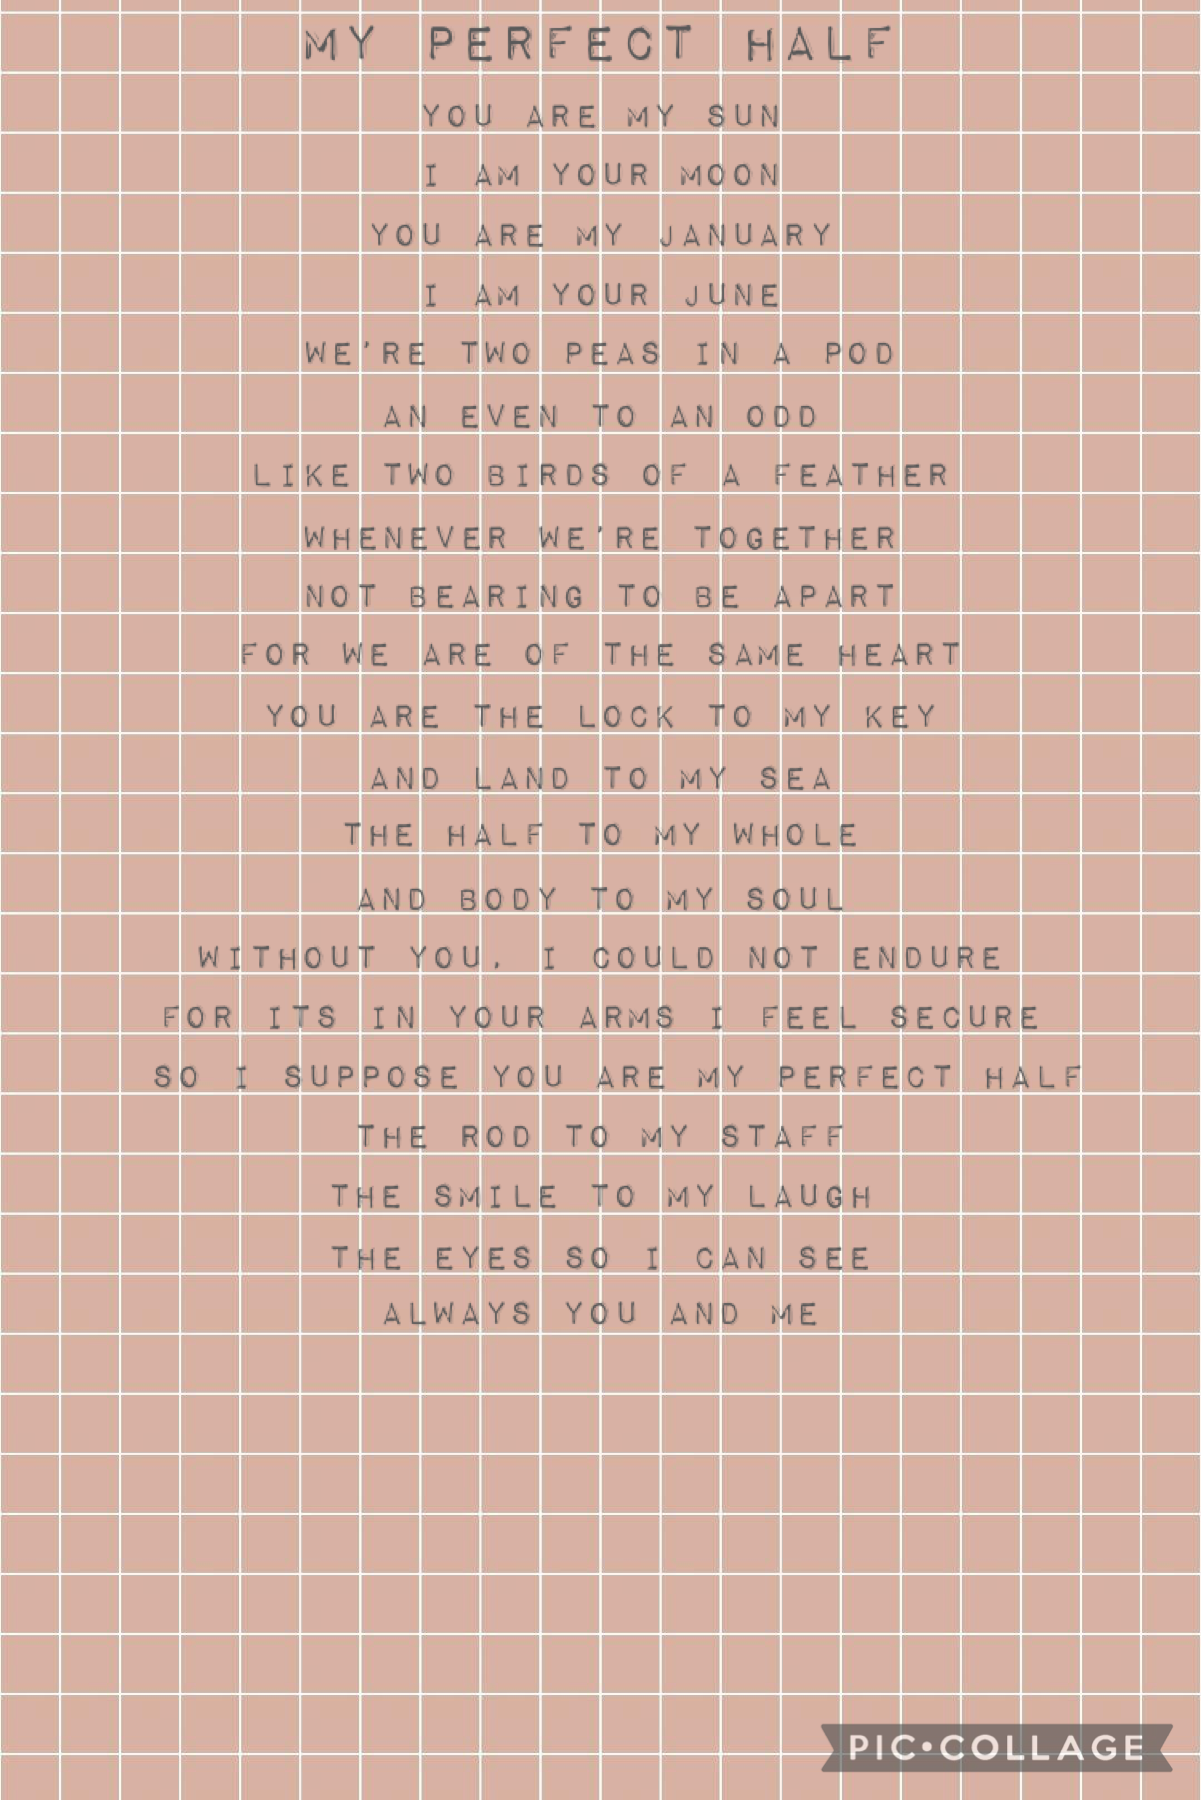 POEM TIME (tap)
yea i know yall are probably sick of me posting my random (awful) poems butttt i have nothing else to post so here you go
i kinda like this one, mostly dont tho
anyways
idk